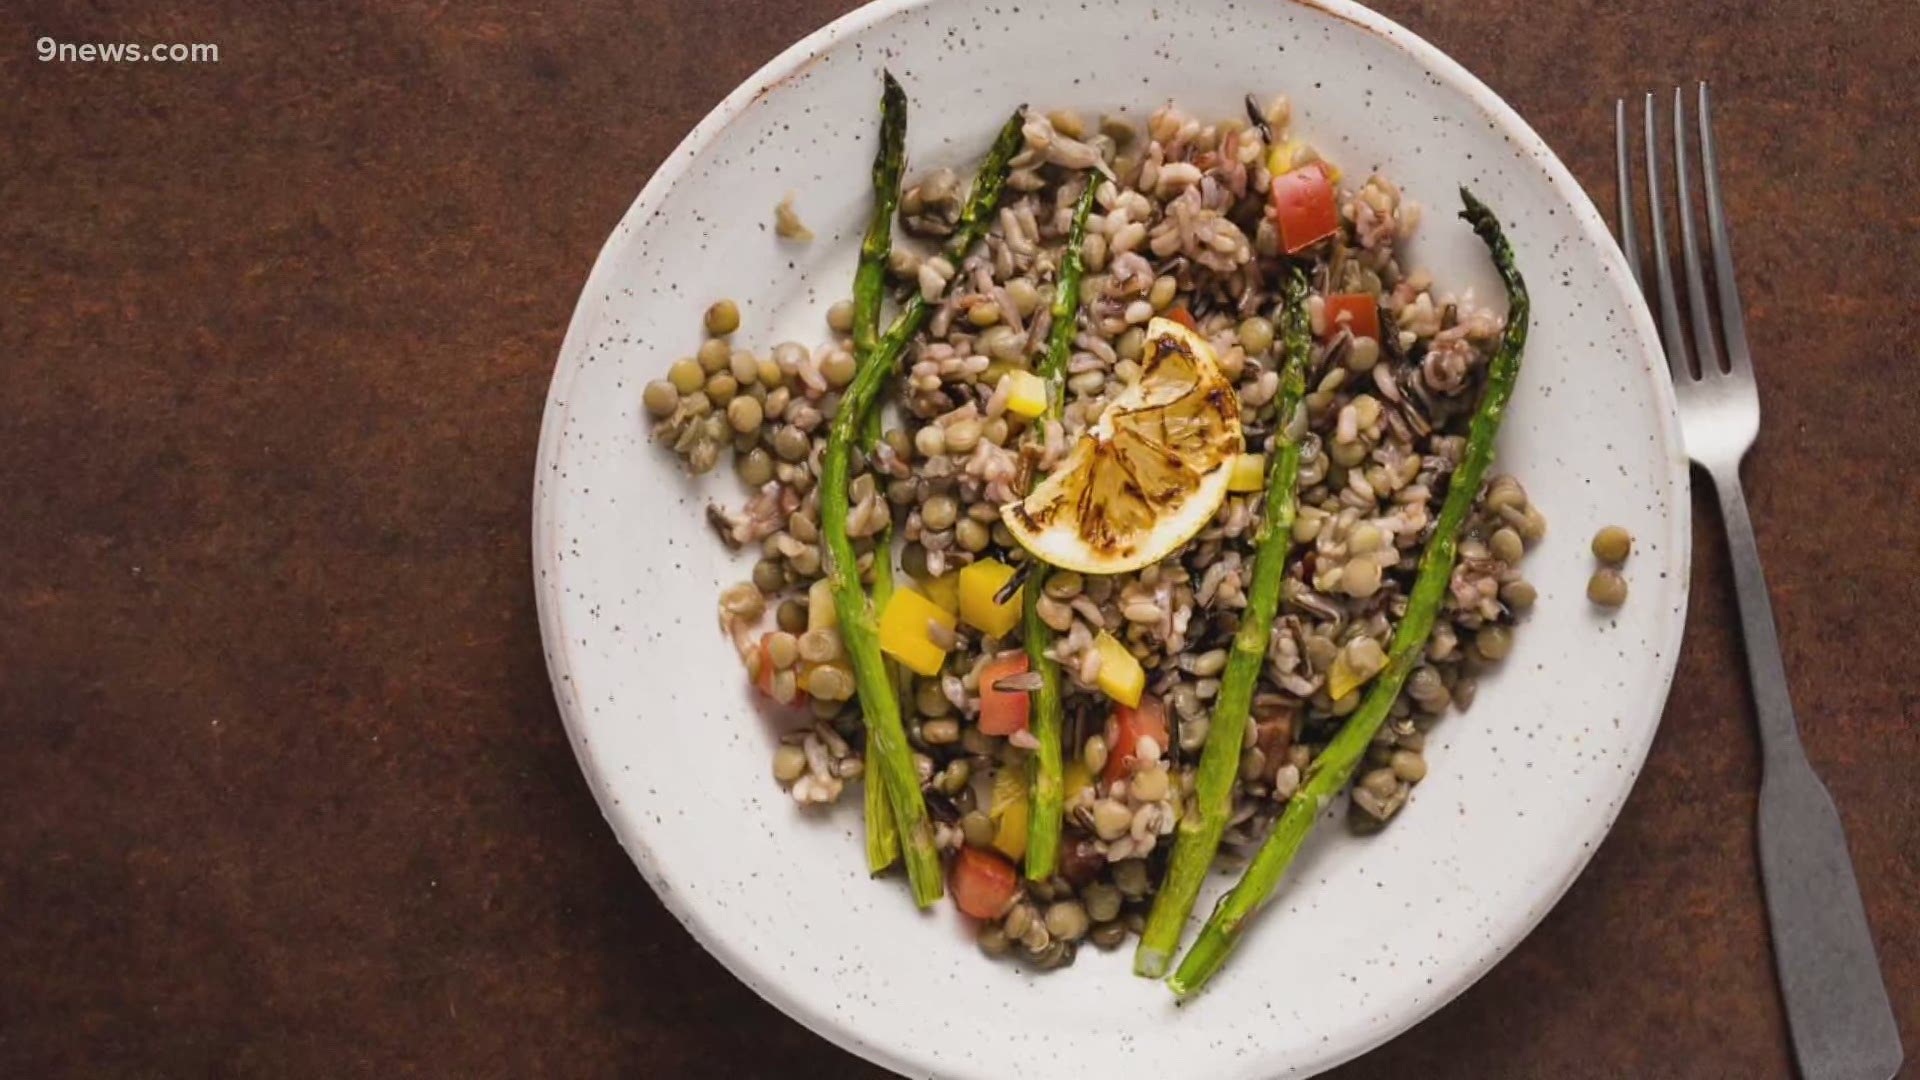 9NEWS Nutrition Expert Malena Perdomo shares this crusty pan-fried lentil patties recipe that's great for when you have leftover lentils.